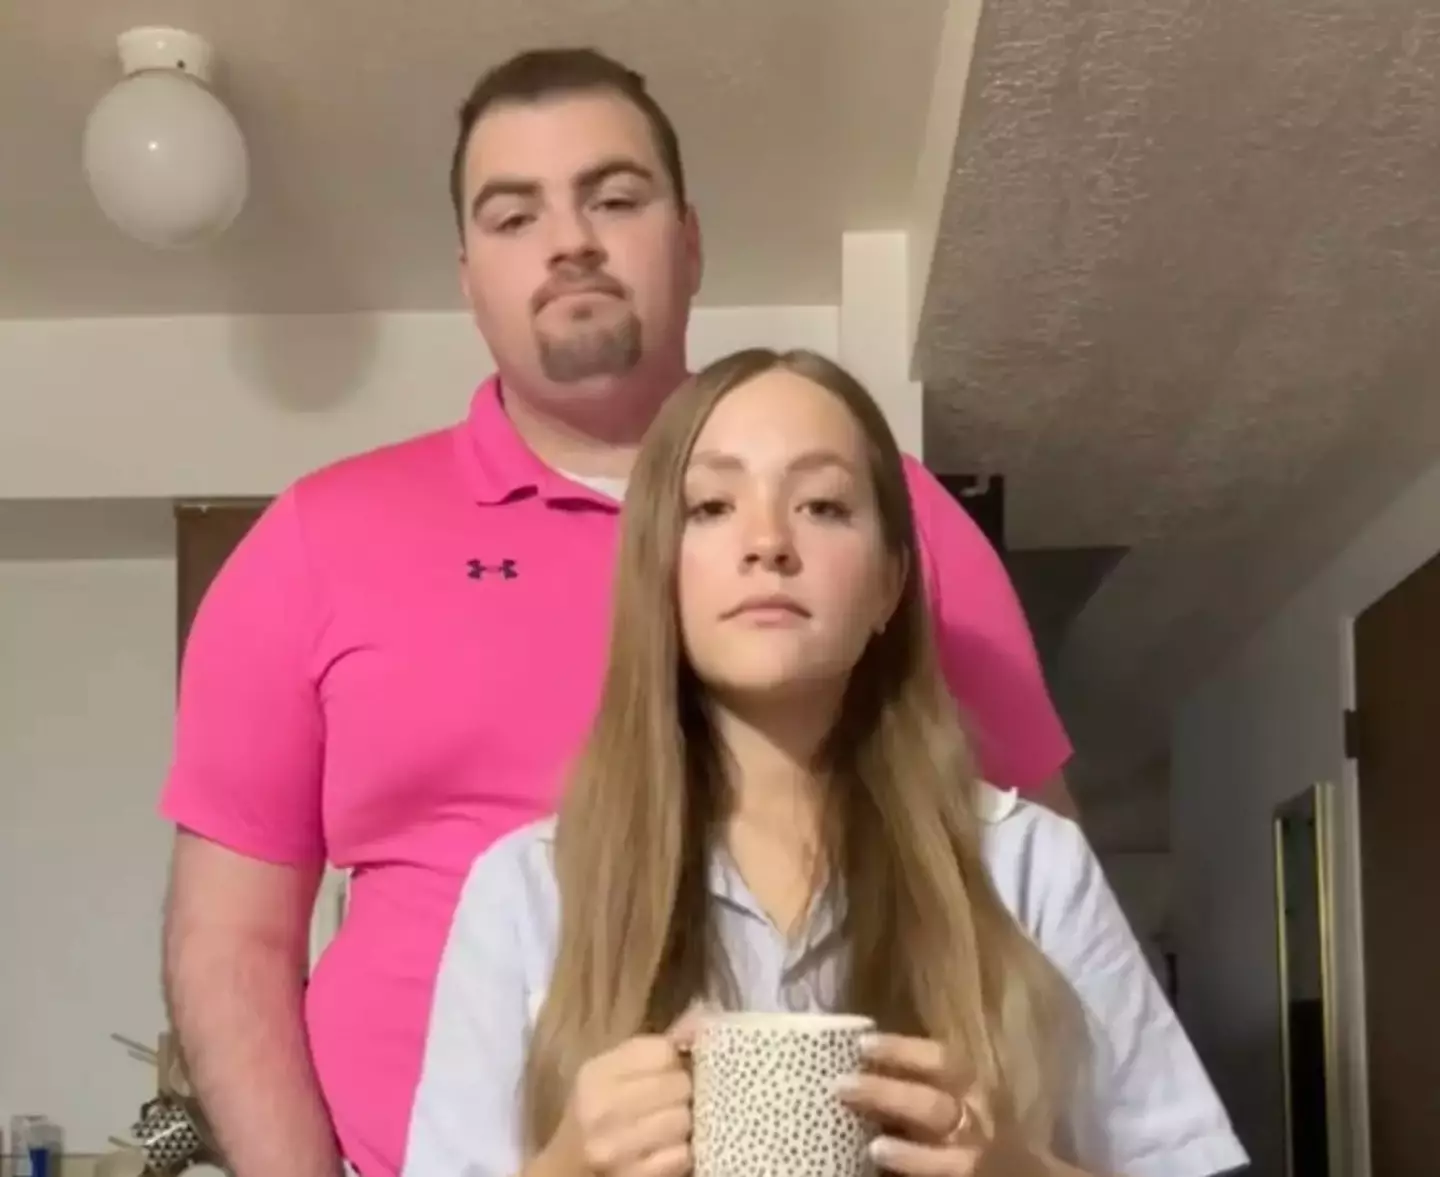 Lilly Anne and her husband Evan have sparked a fiery debate online about DINK relationships. TikTok/@lillyanne_